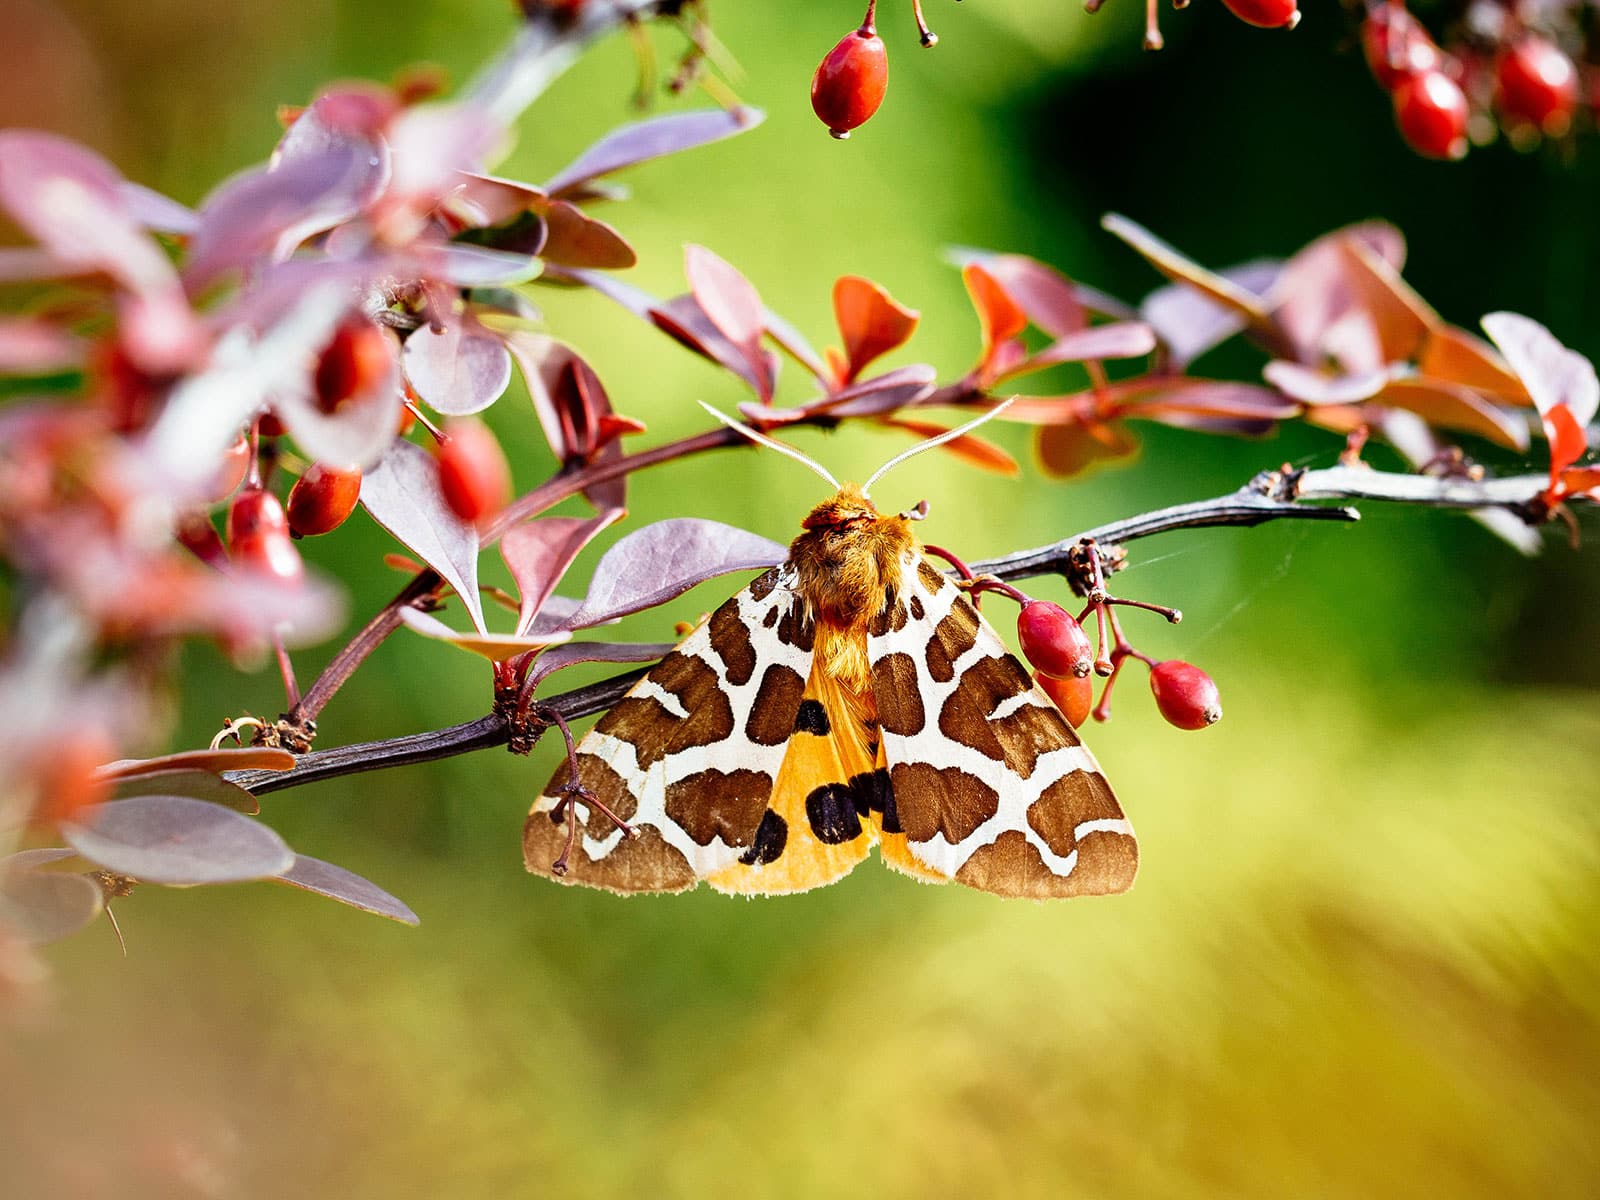 A garden tiger moth sitting on a thin branch with small red leaves and red berries